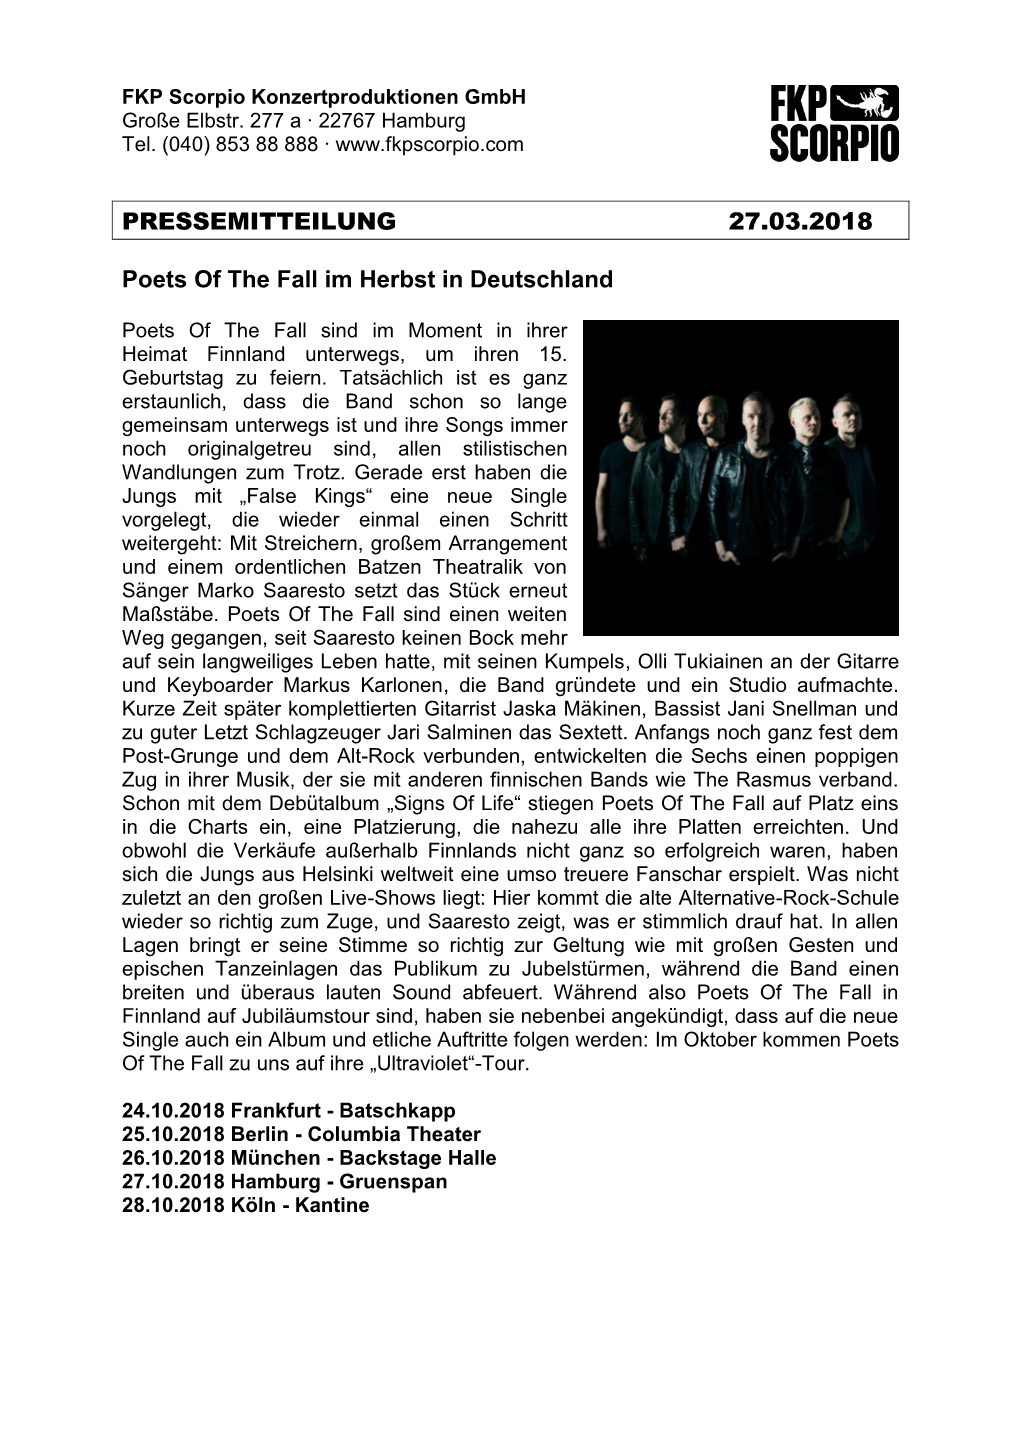 PRESSEMITTEILUNG 27.03.2018 Poets of the Fall Im Herbst In